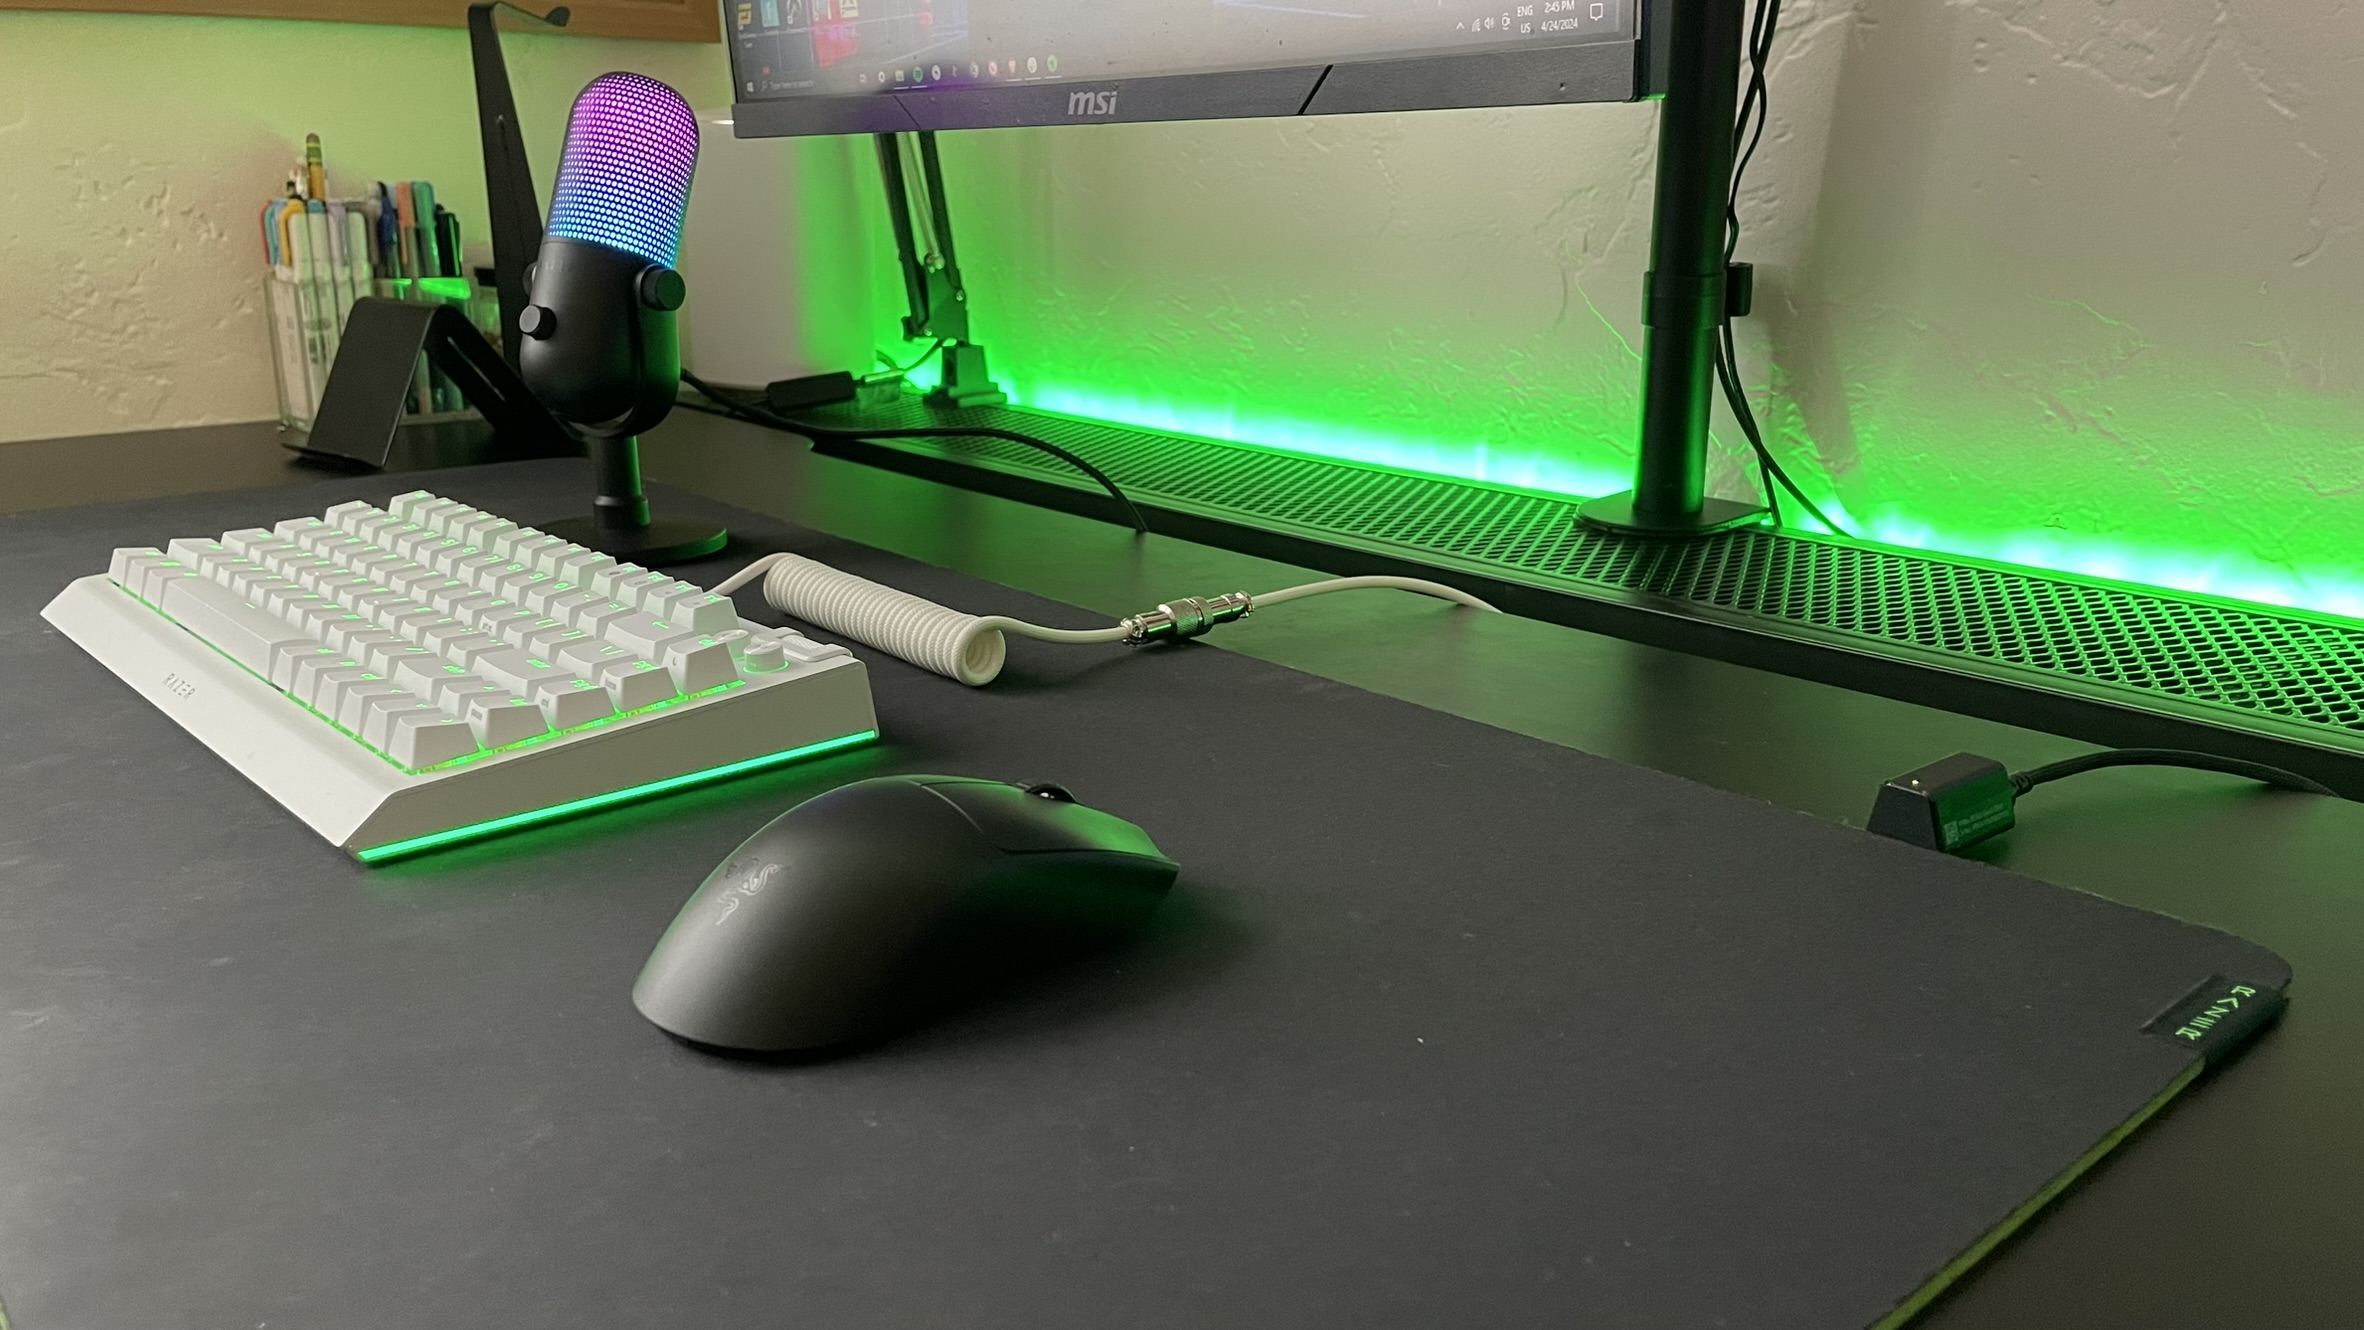 The Razer Viper V3 Pro gaming mouse in action